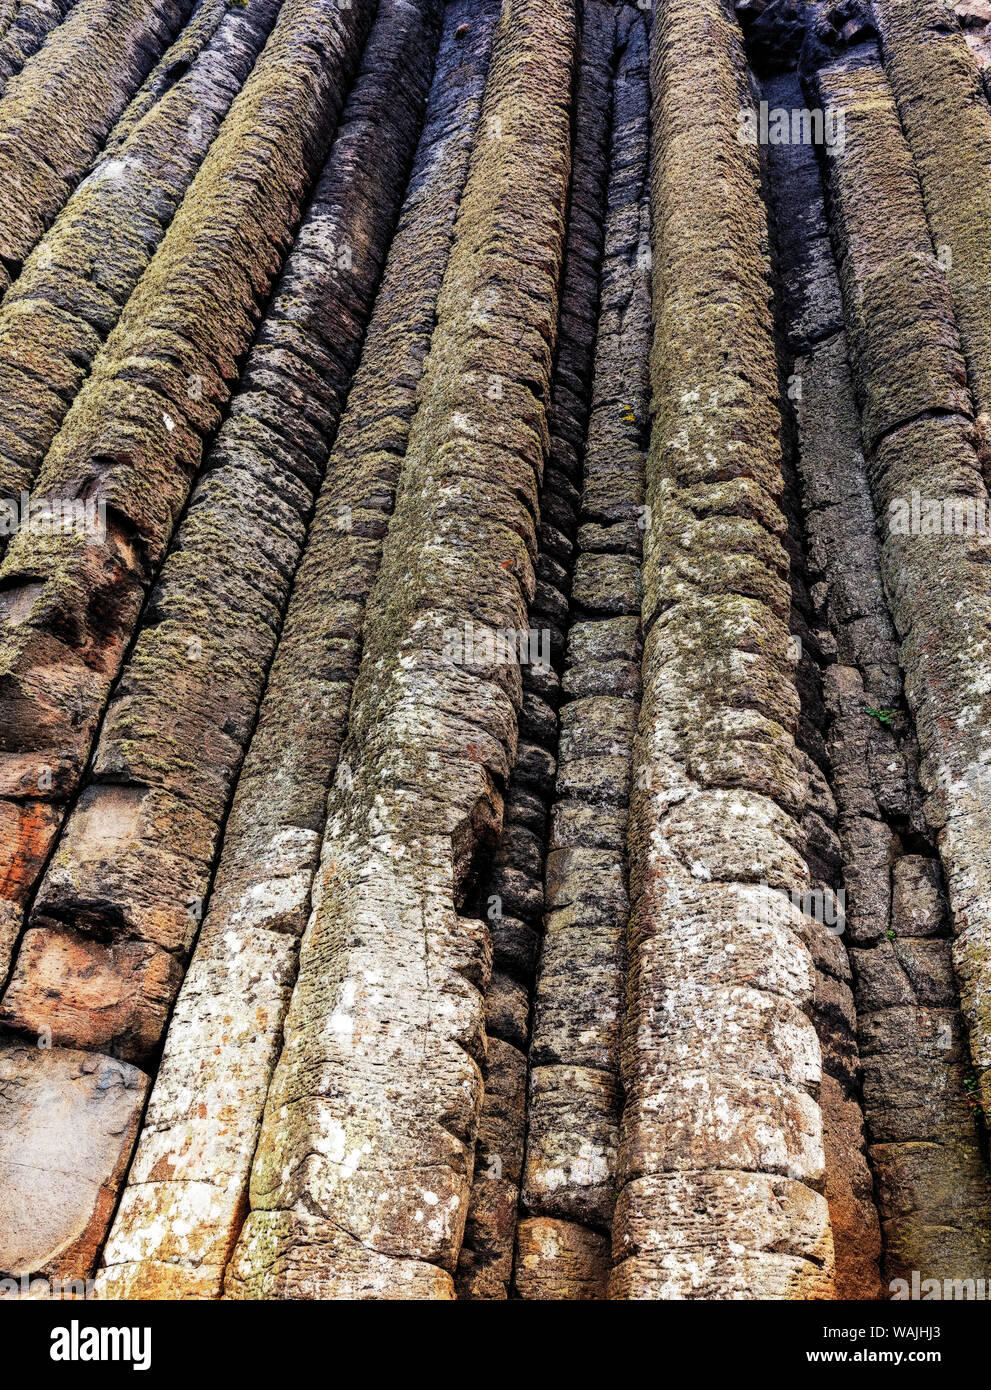 Columnar basalt at the Giant's Causeway in County Antrim, Northern Ireland Stock Photo